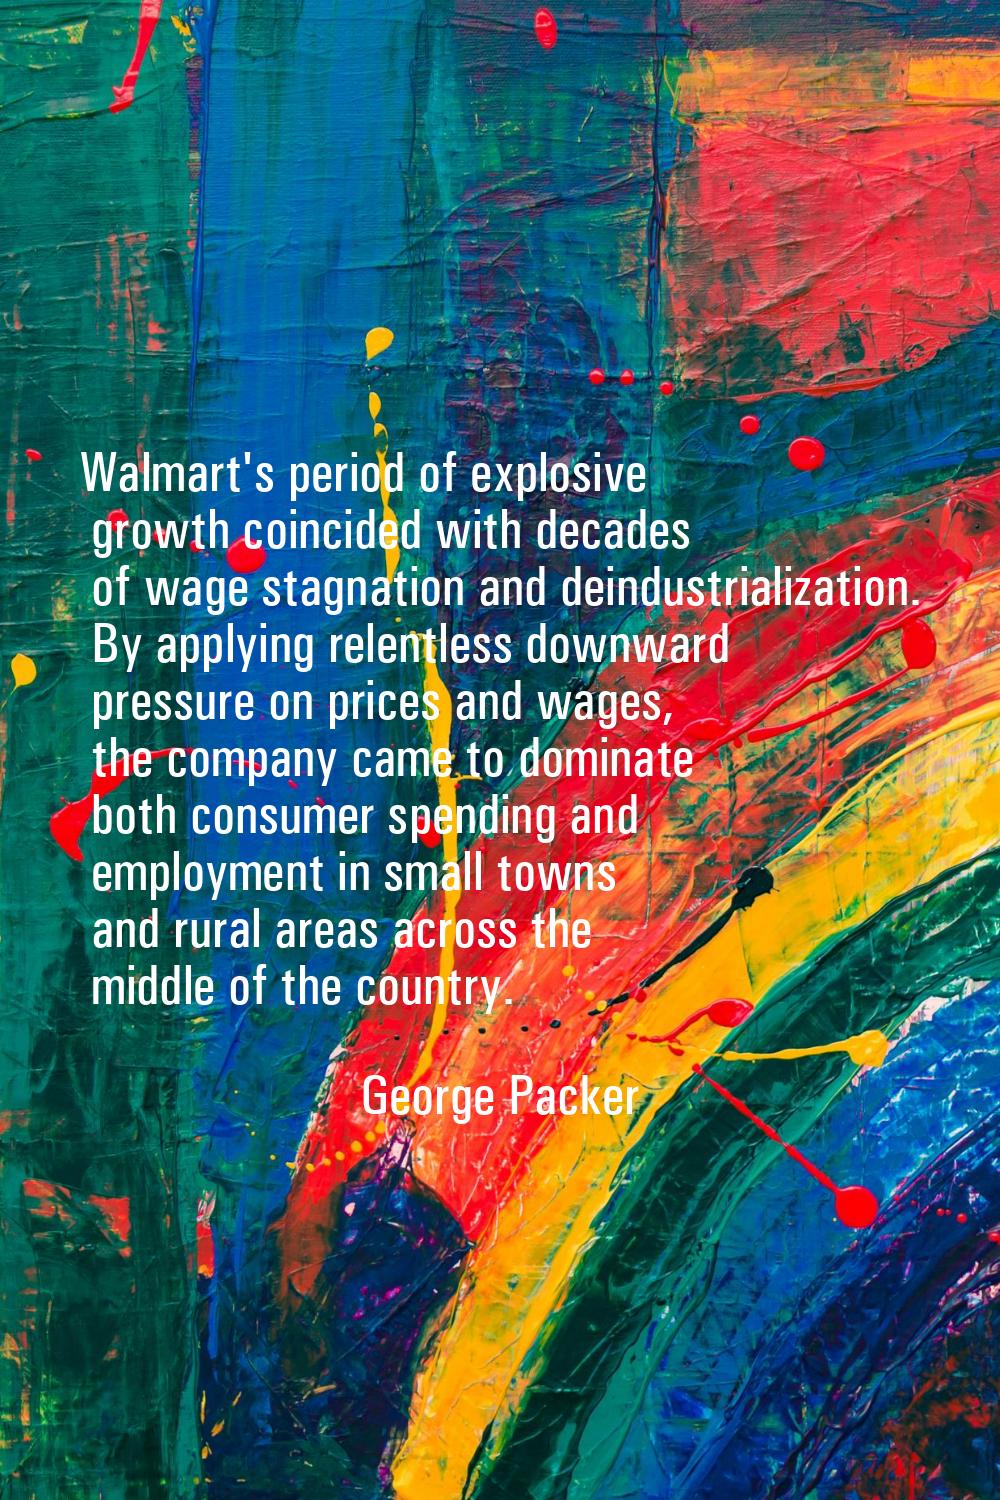 Walmart's period of explosive growth coincided with decades of wage stagnation and deindustrializat